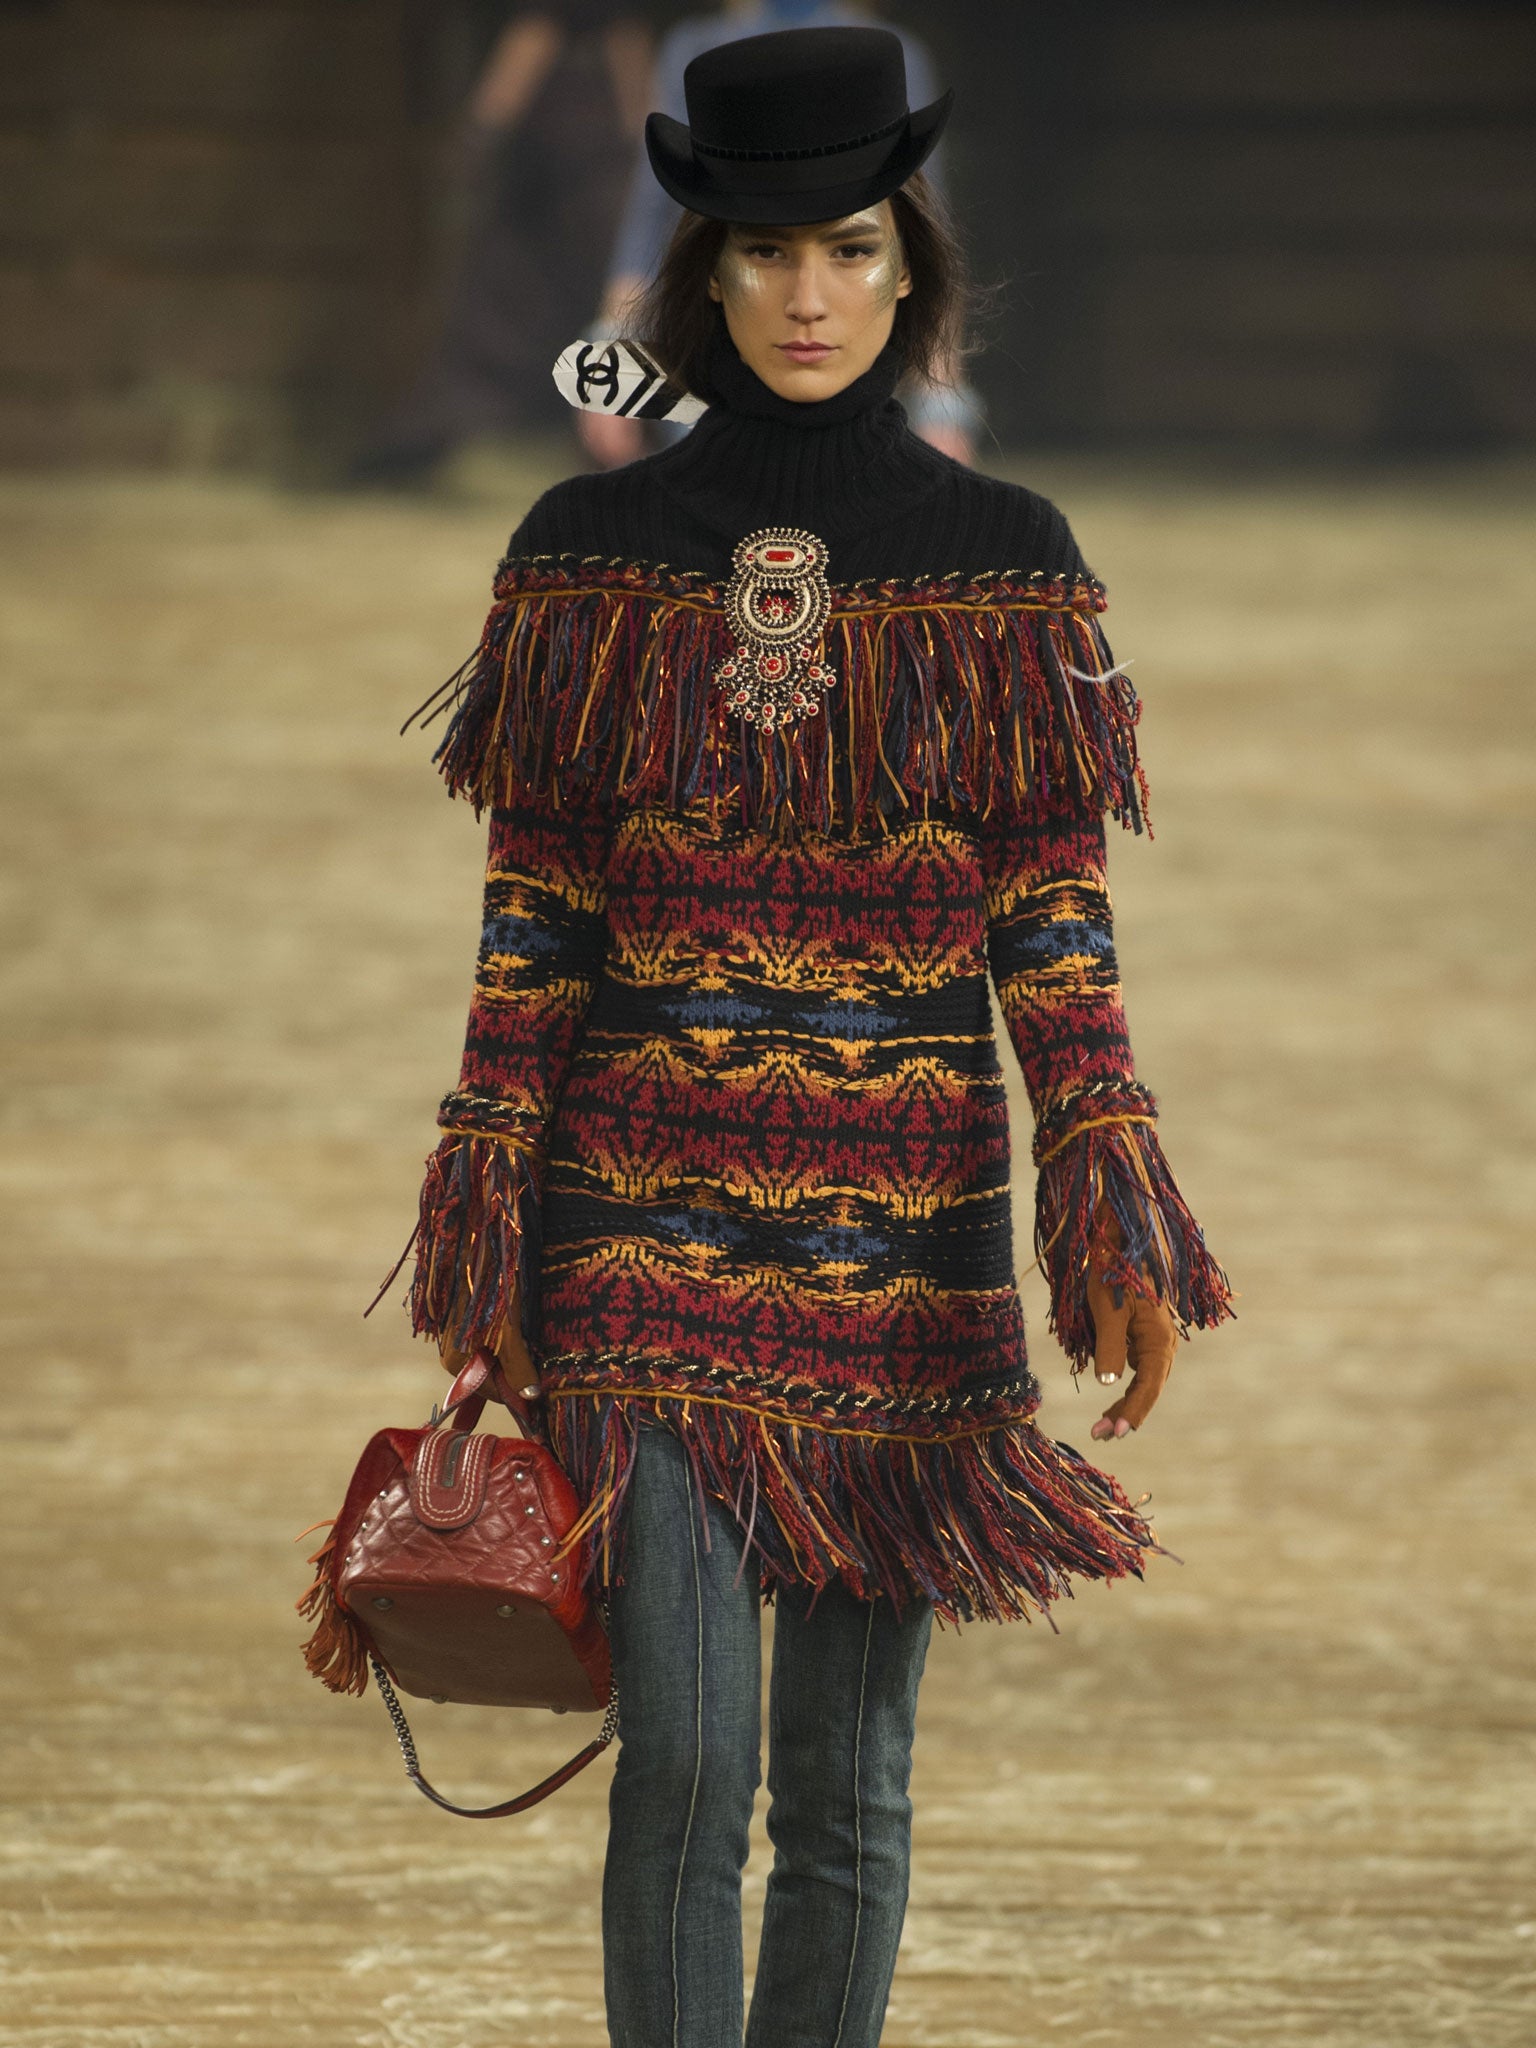 In pictures: Chanel heads to Texas for the Pre-Fall 2014 Metiers d’Art ...